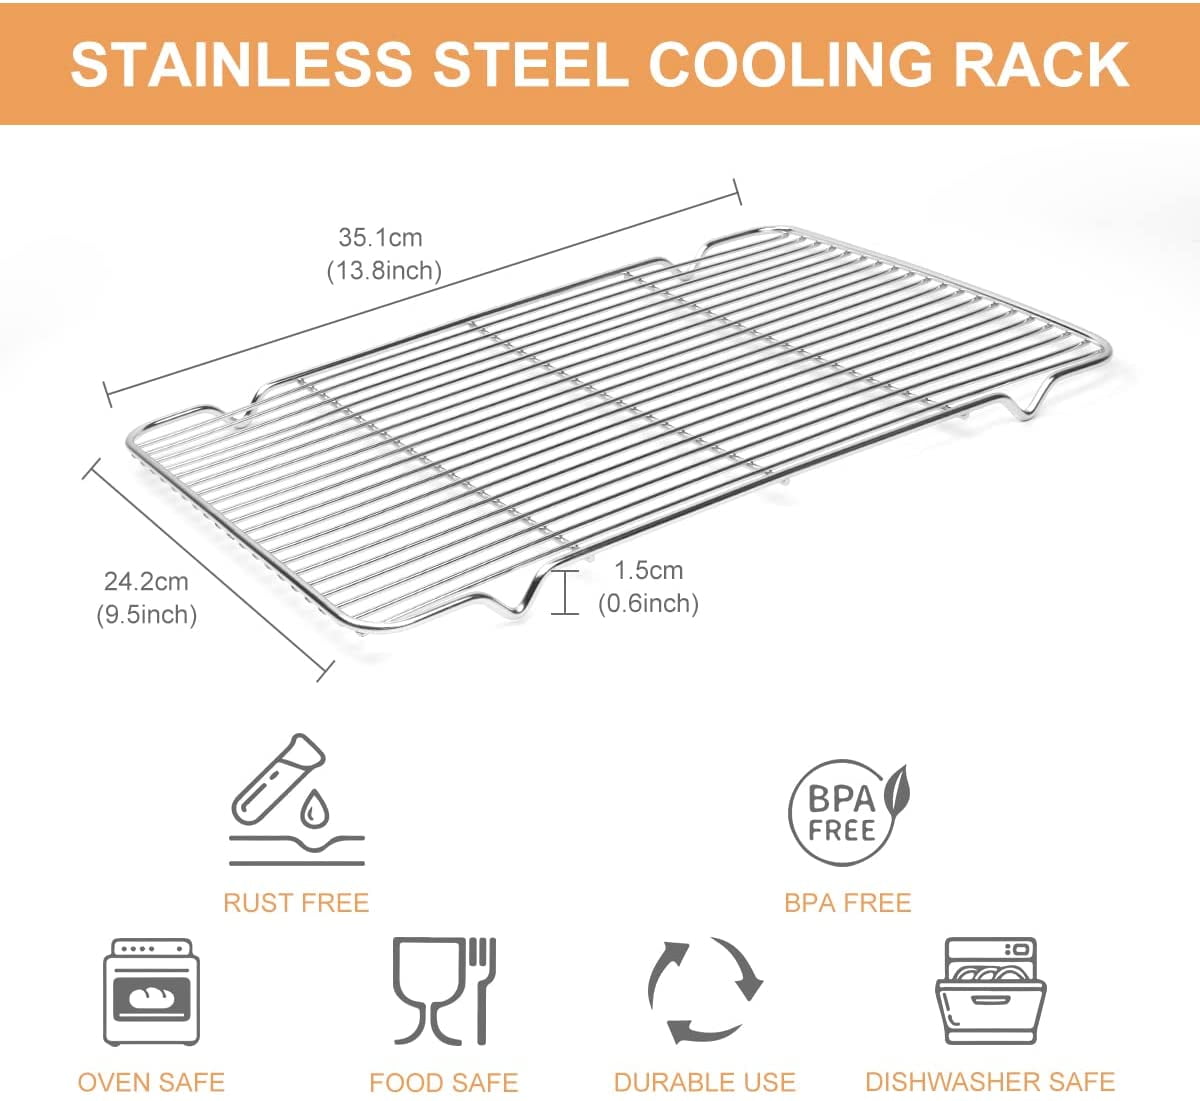 14 x 10 Oven & Dishwasher Safe 100% Heavy Duty Stainless Steel Cooling Racks & Baking Rack for Cooking Baking Roasting Grilling Cooling